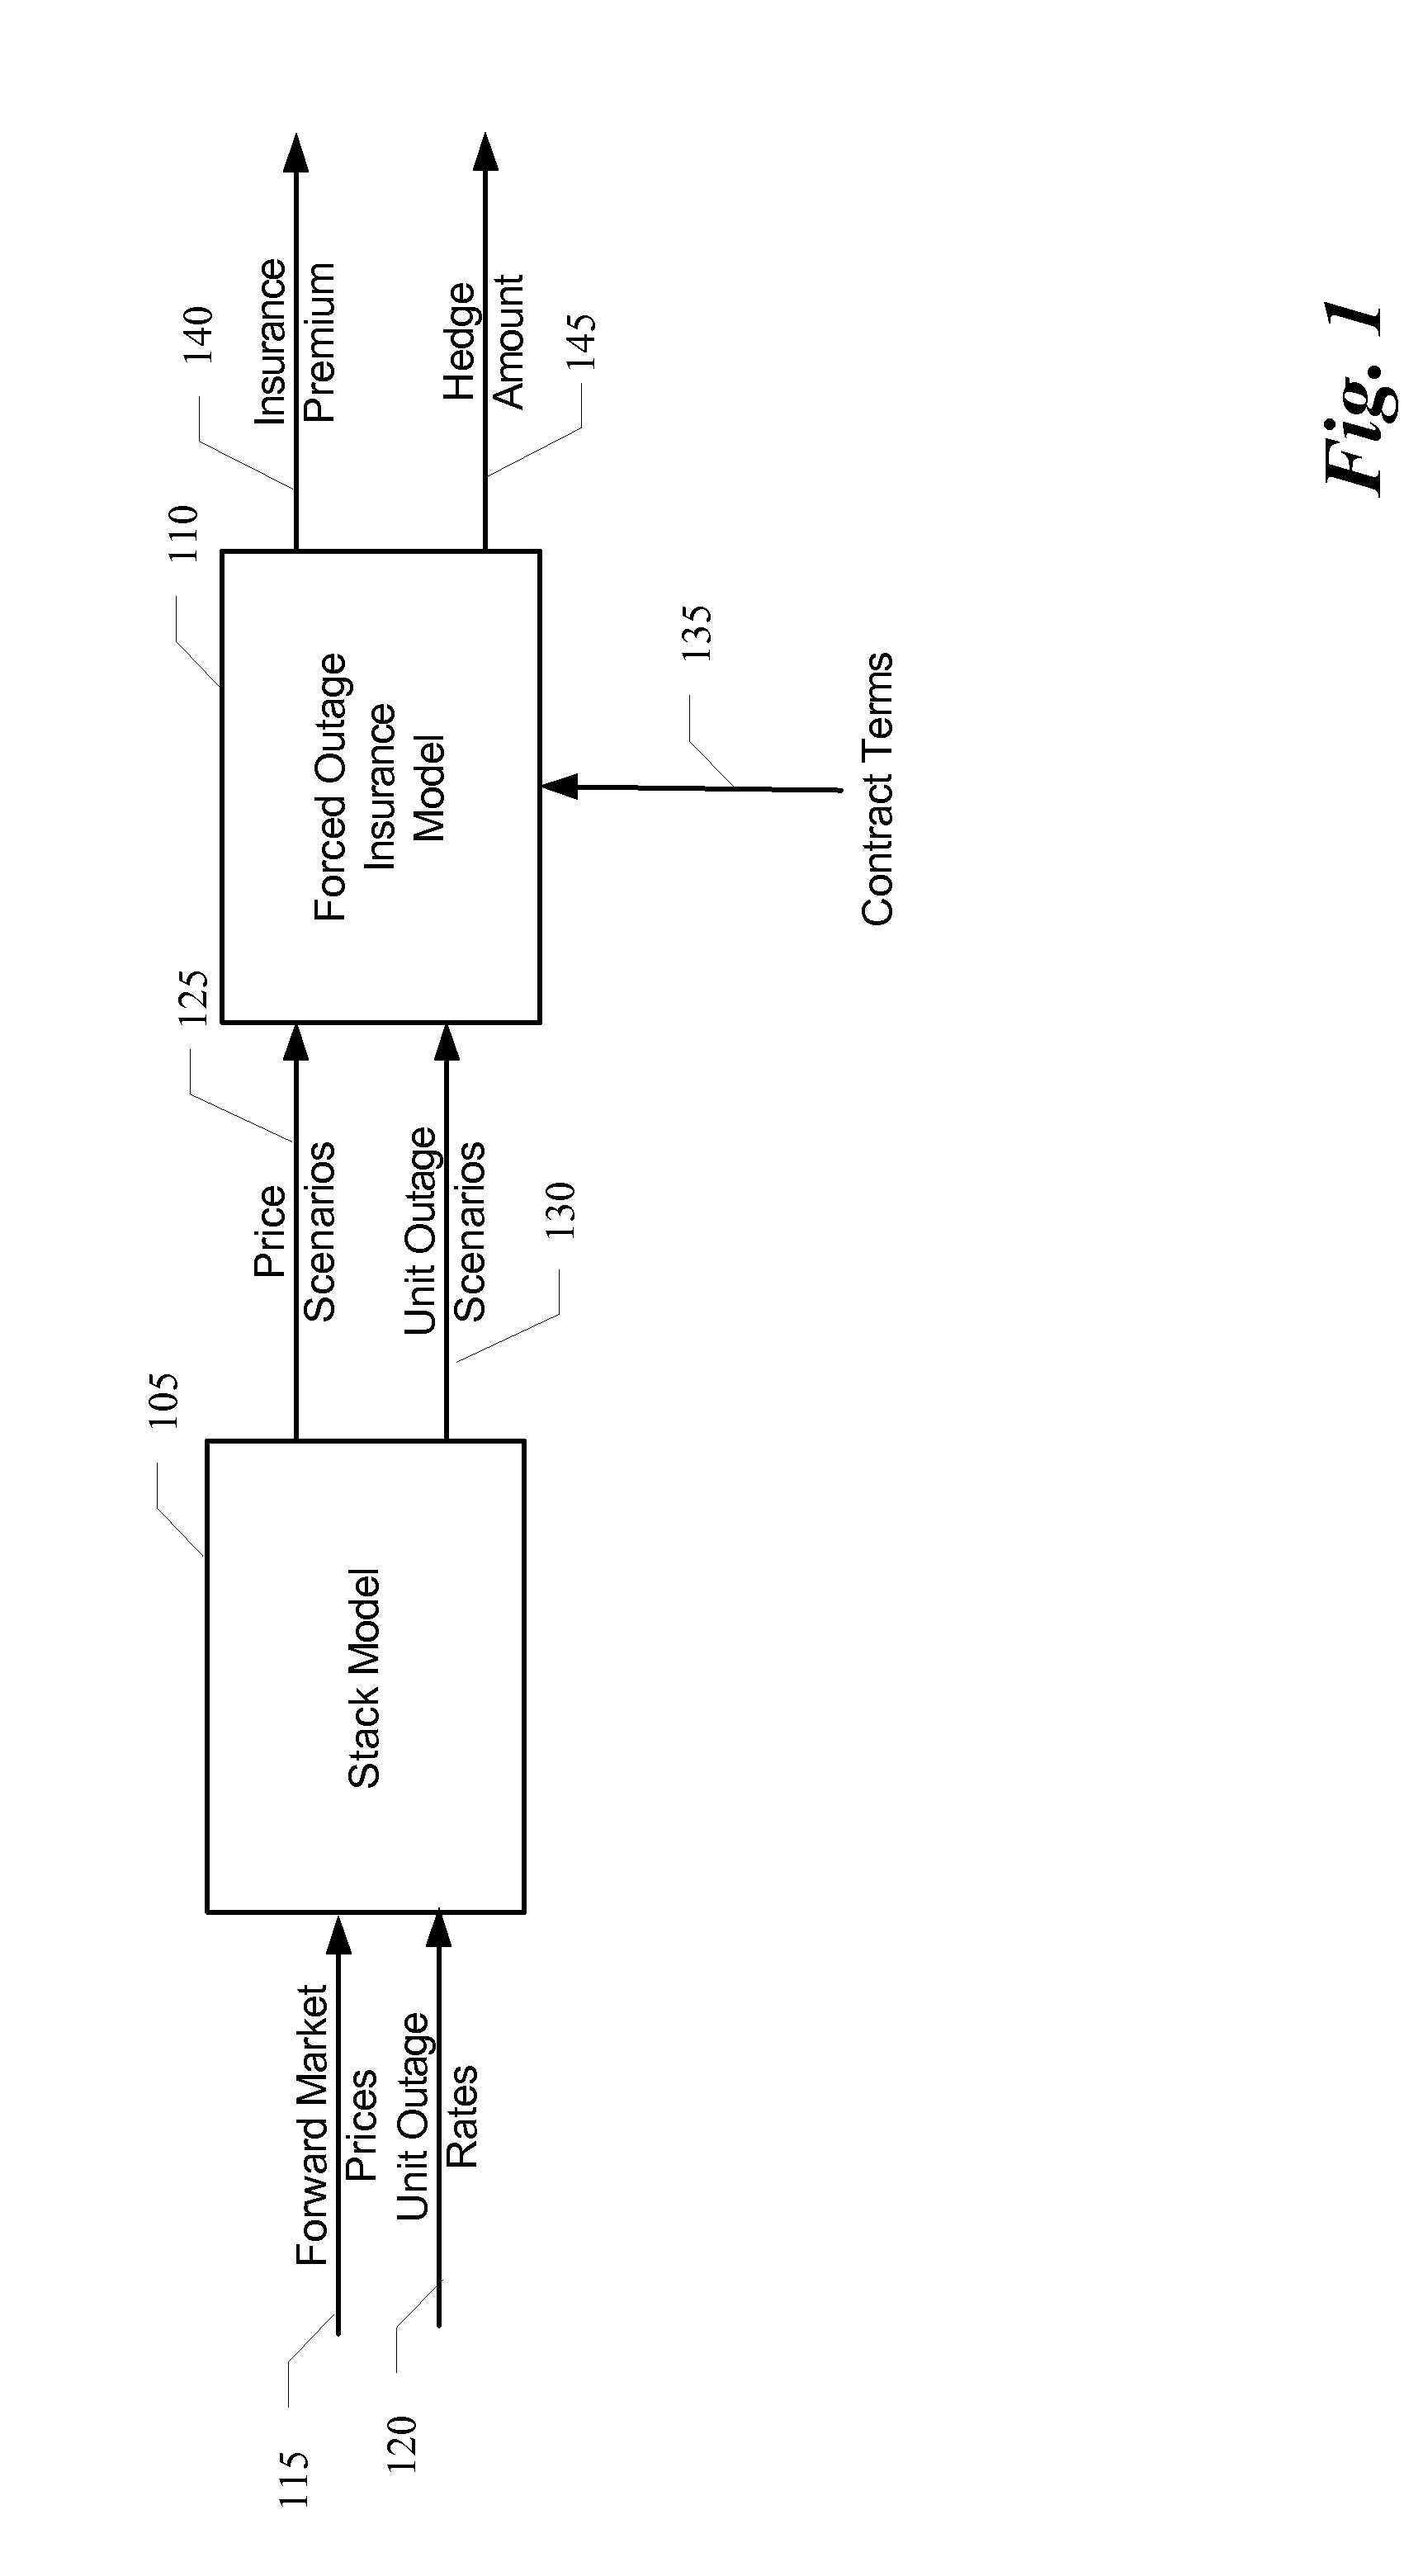 Method for producing a superior insurance model for commodity event risk